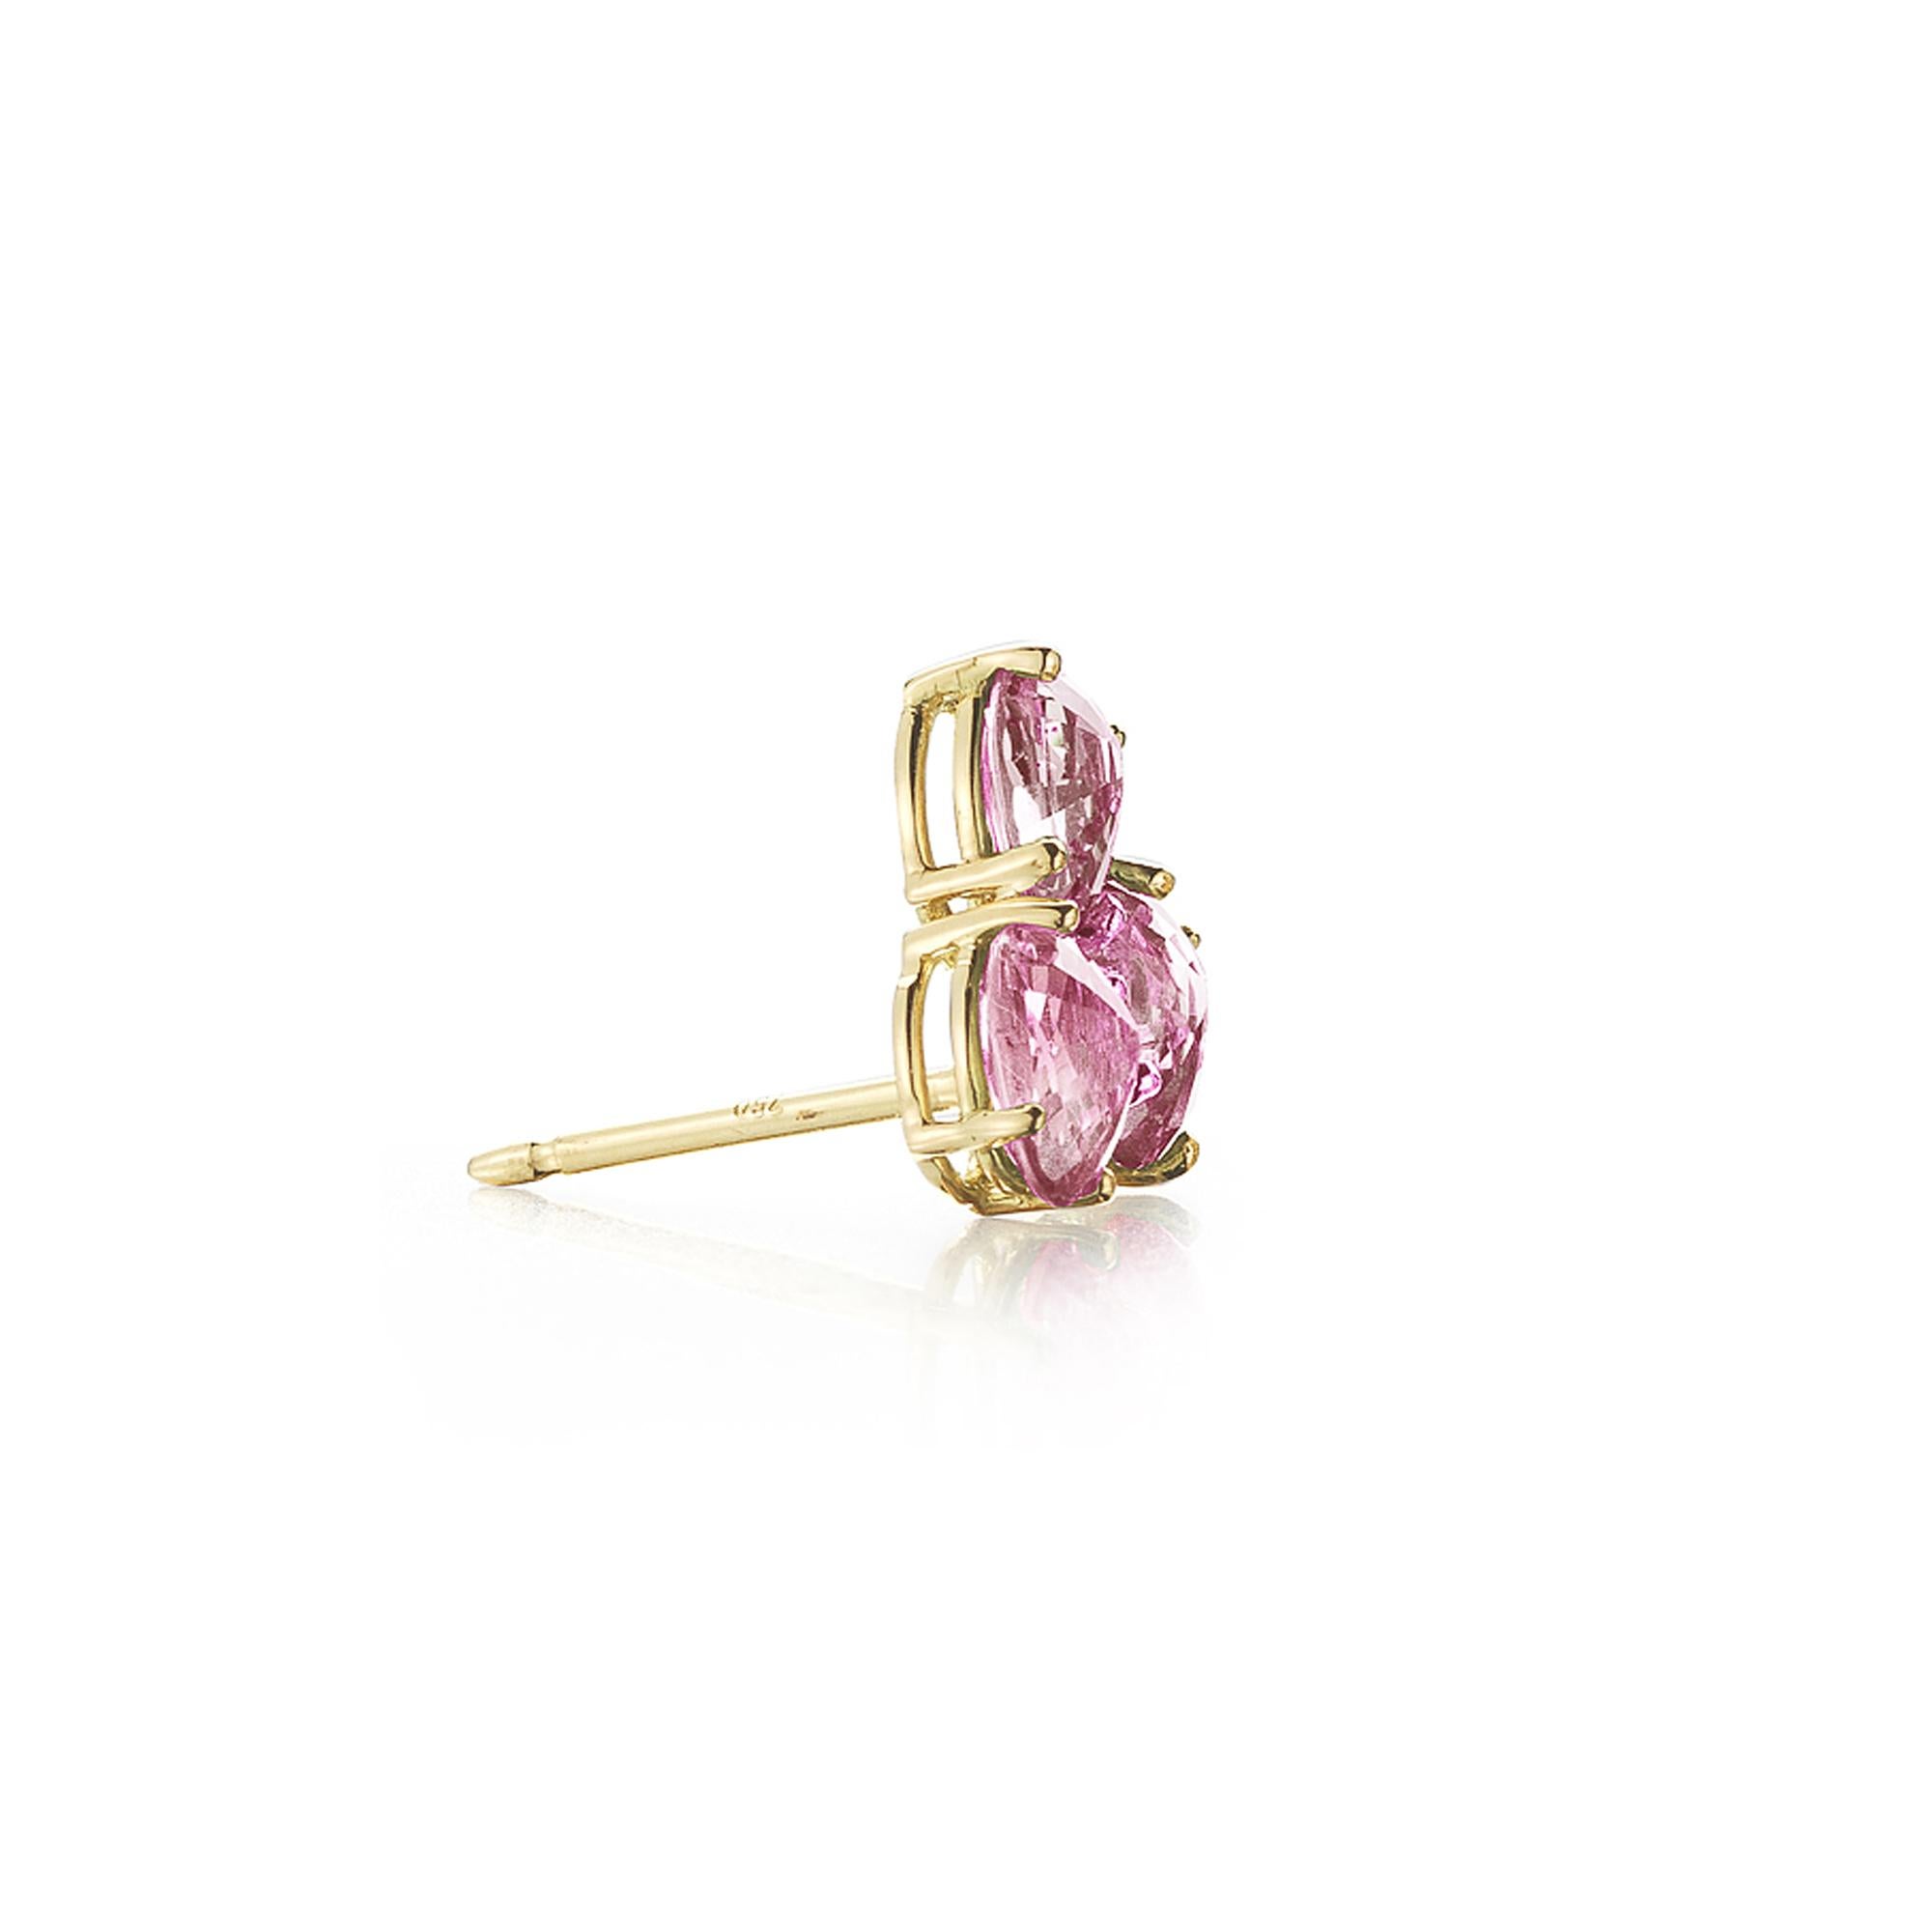 18kt yellow gold Ombré stud earring set with oval pink sapphires.

Reimagined from summers spent at the Tuscan shore, the Ombré collection highlights the diverse hues and textures found in sapphires. Paolo Costagli hand selects the sapphires in